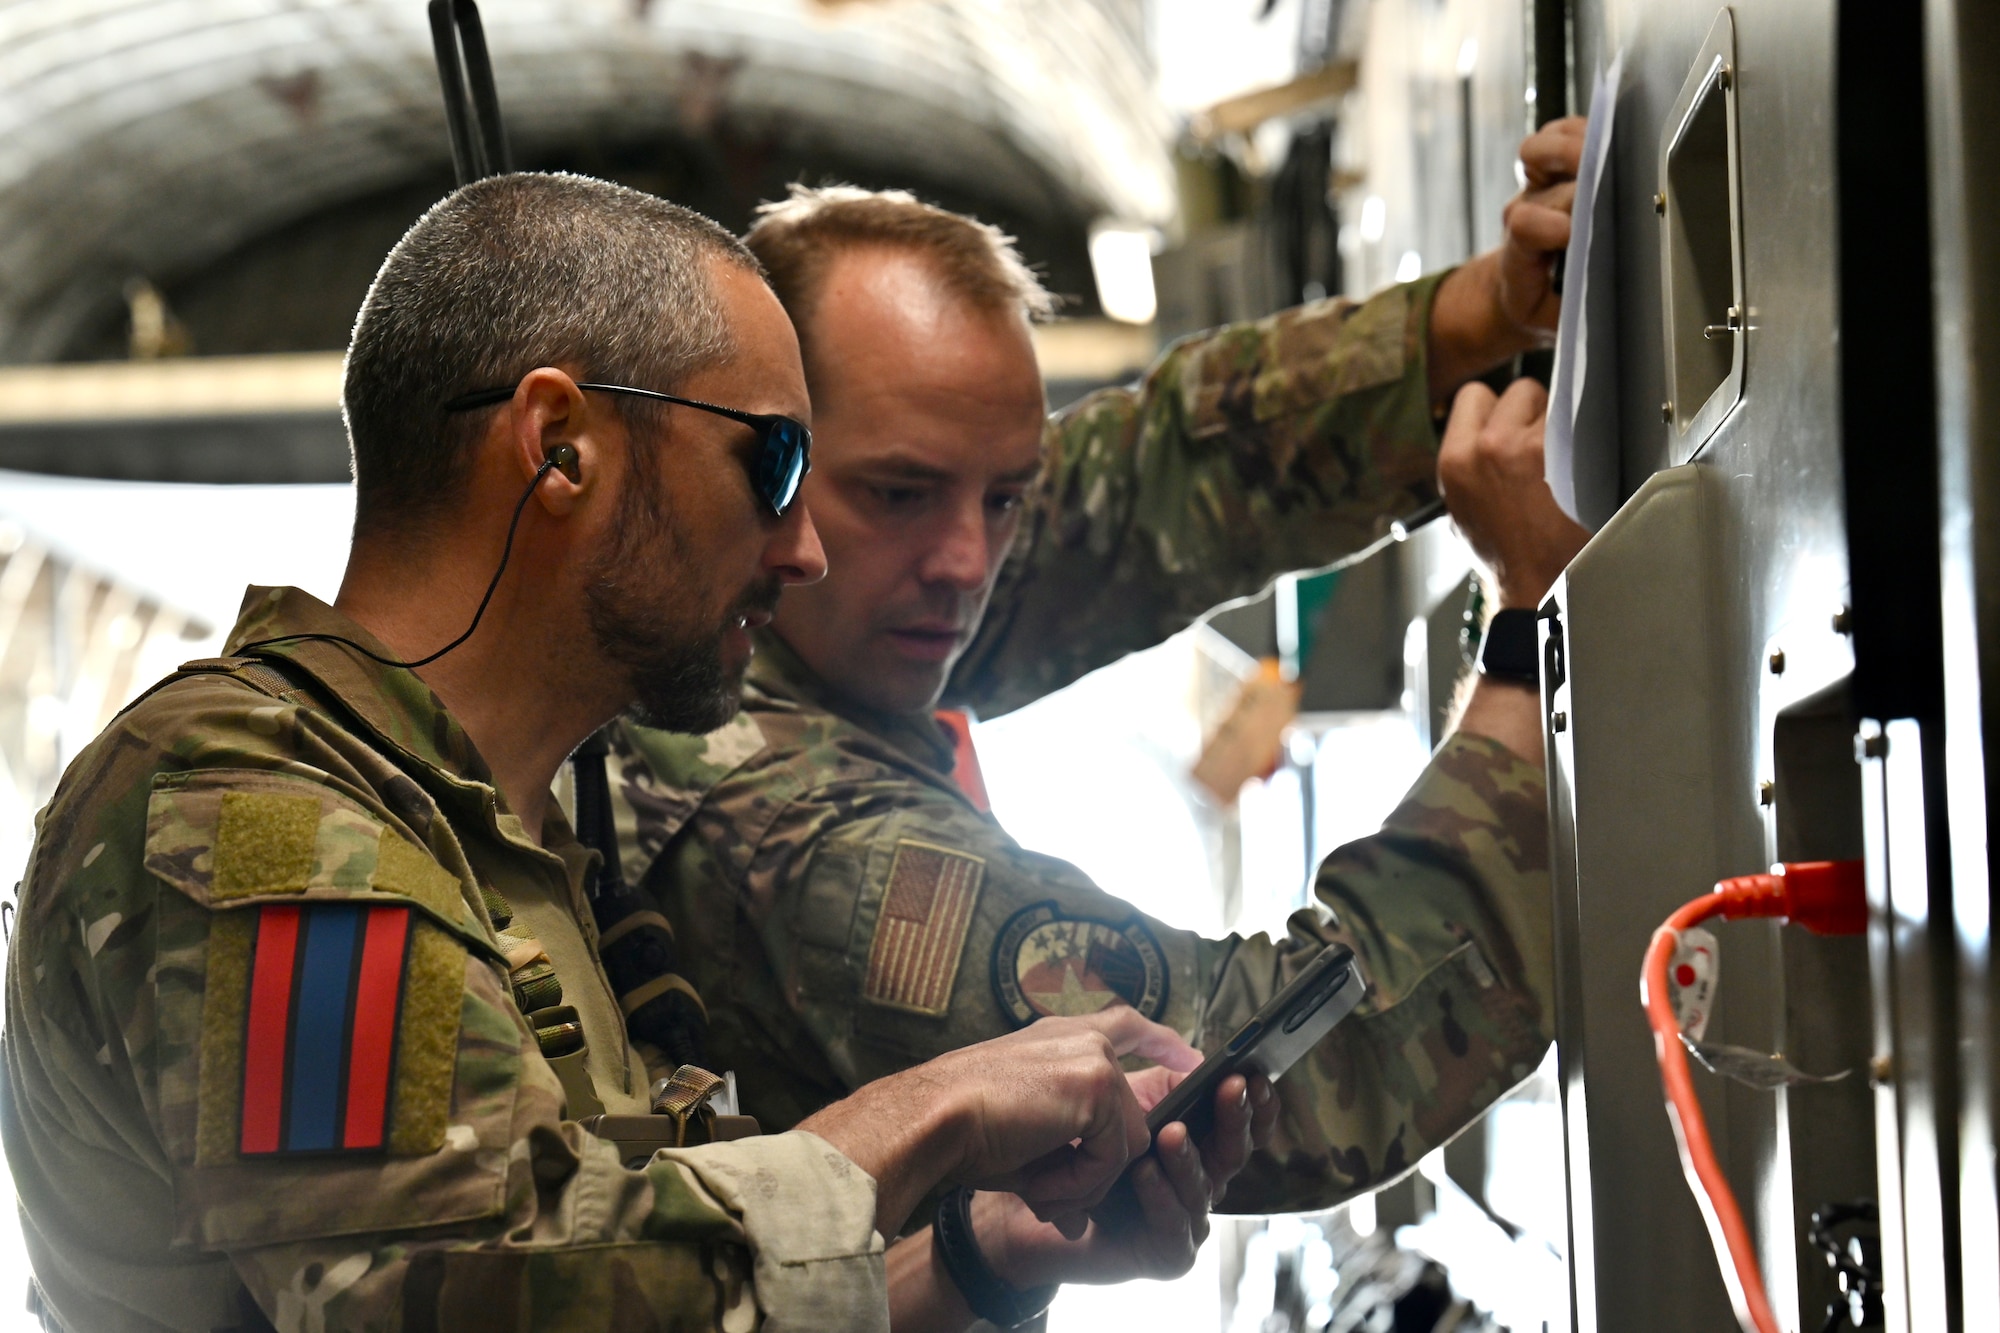 U.S. Air Force Tech. Sgt. Shawn Beedham, assigned to the 727th Air Mobility Squadron, and a pathfinder assigned to the Netherlands 11th Air Assault Brigade discuss a passenger manifest during Exercise Defender Europe 23 at Larissa Air Base, Greece, May 13, 2023.